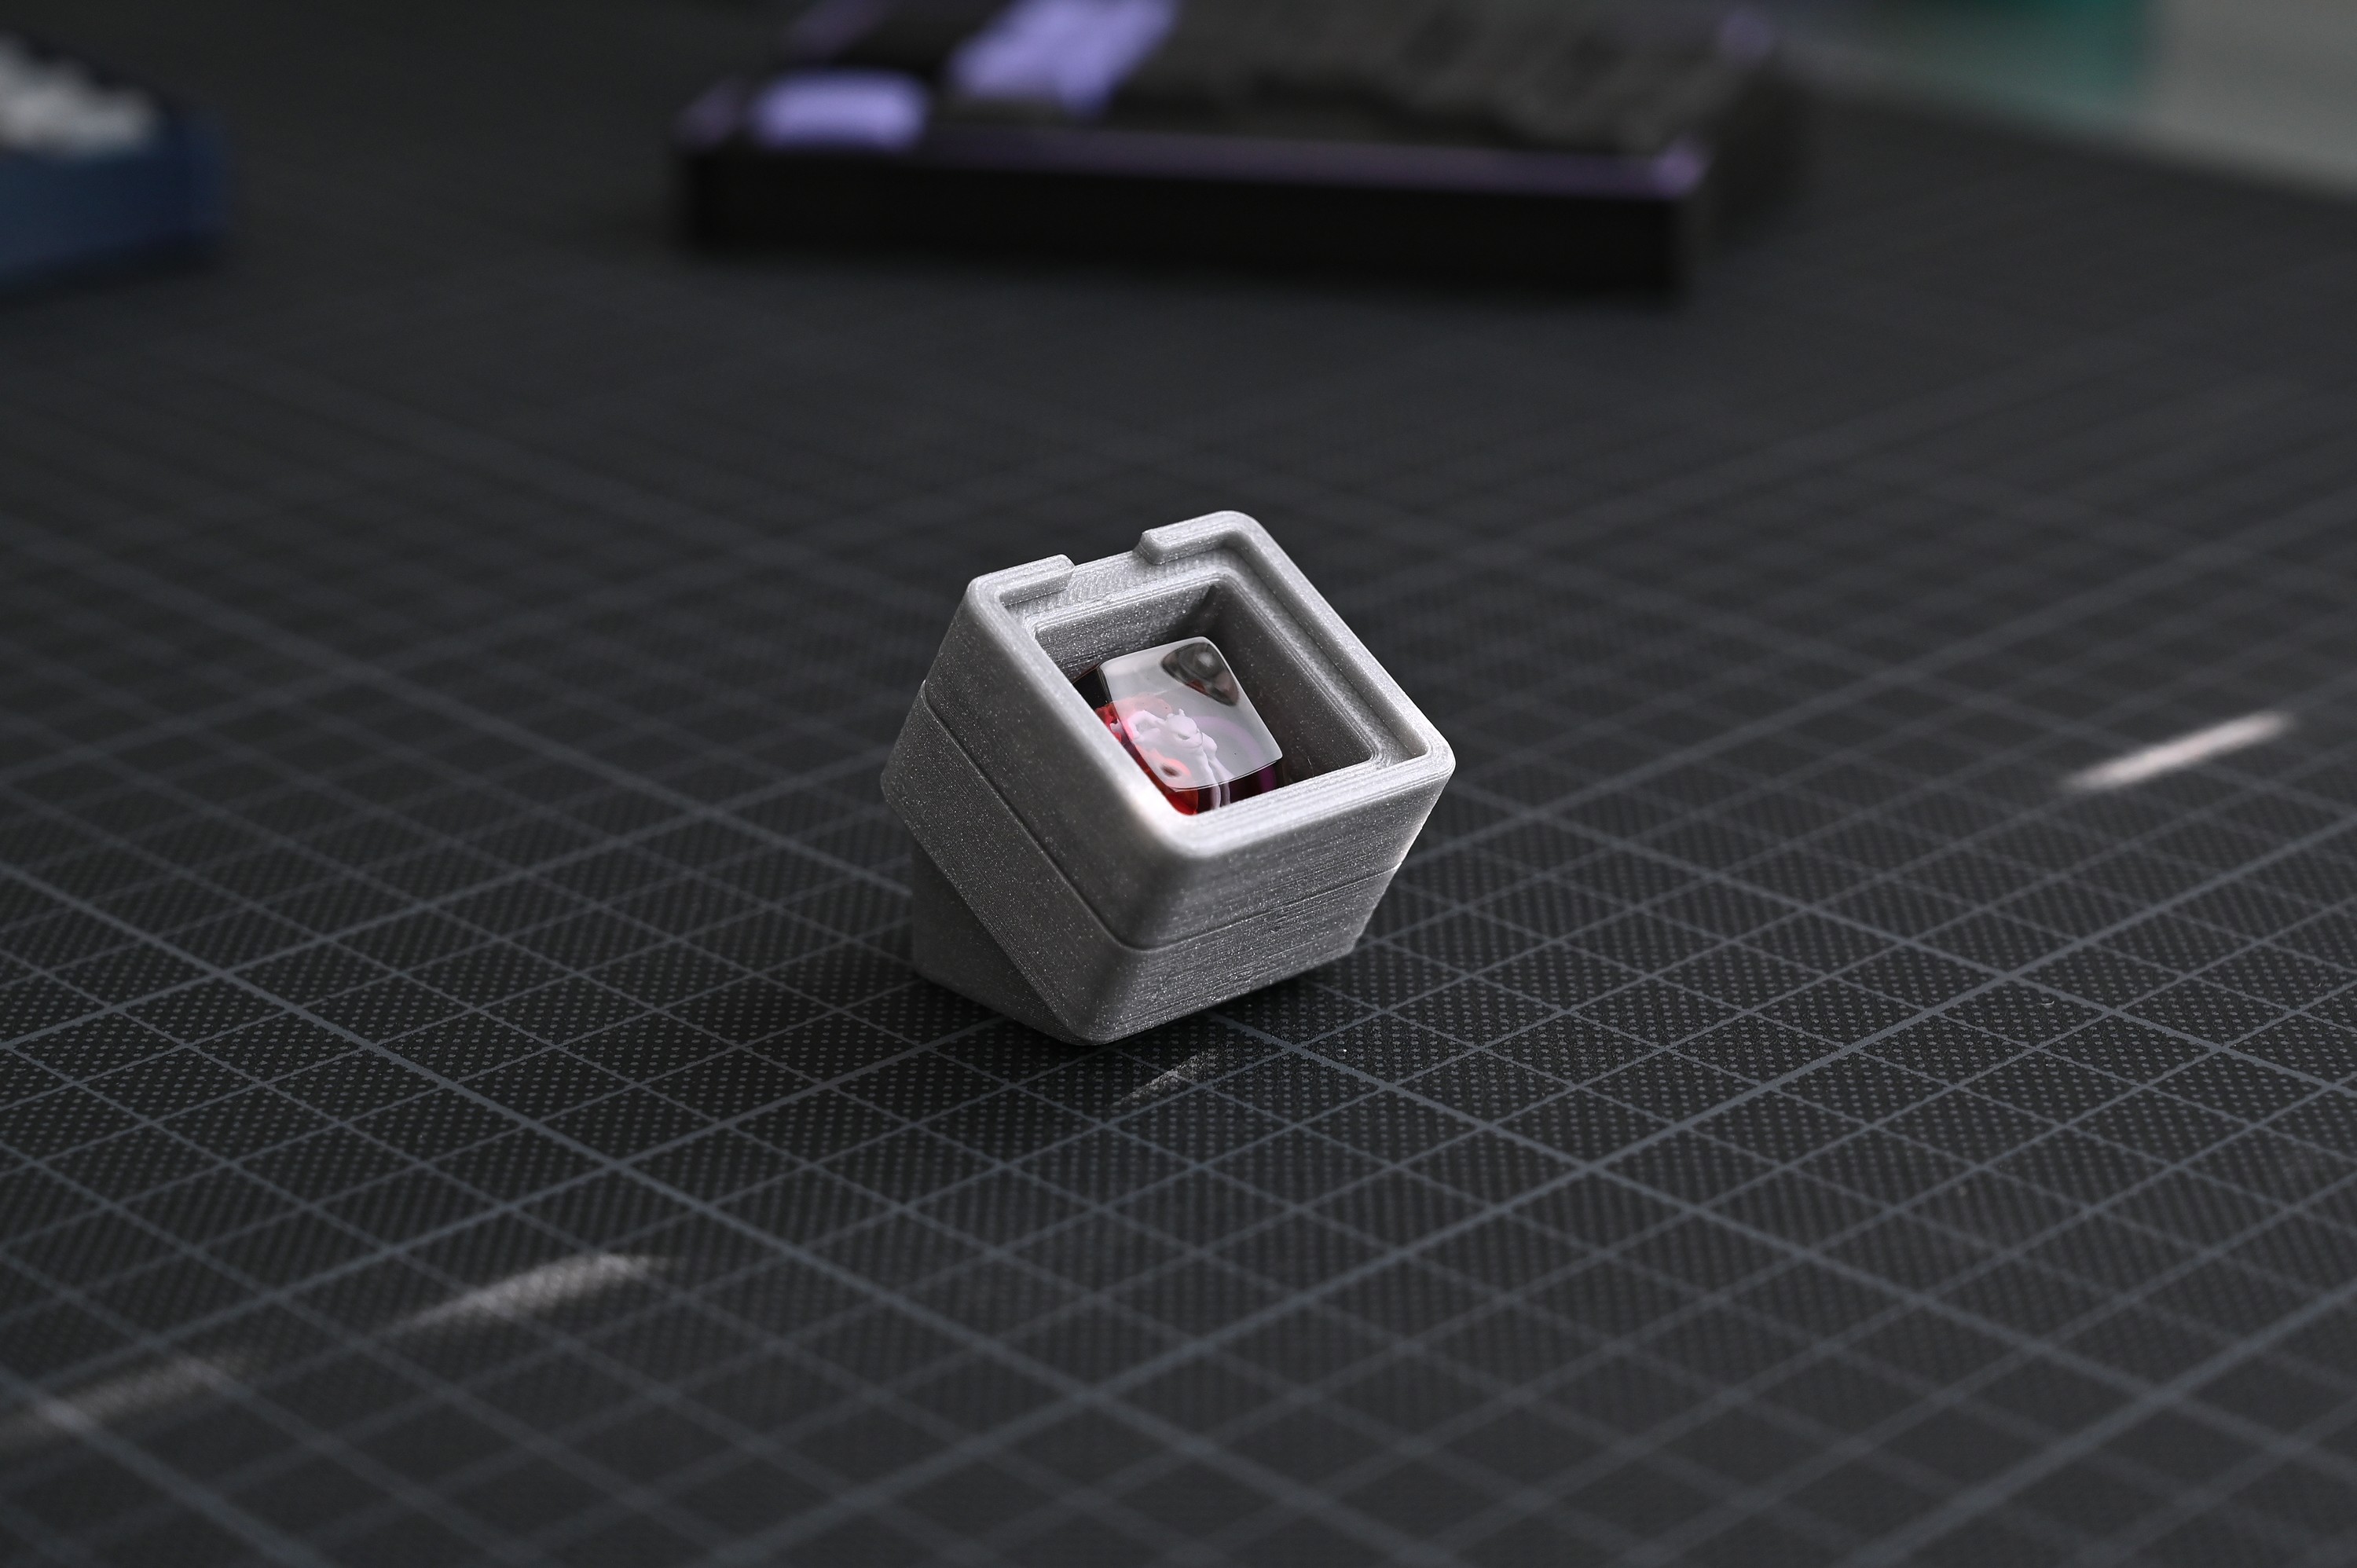 ONE PIECE RED LINE 3D PRINTED ARTISAN KEYCAP